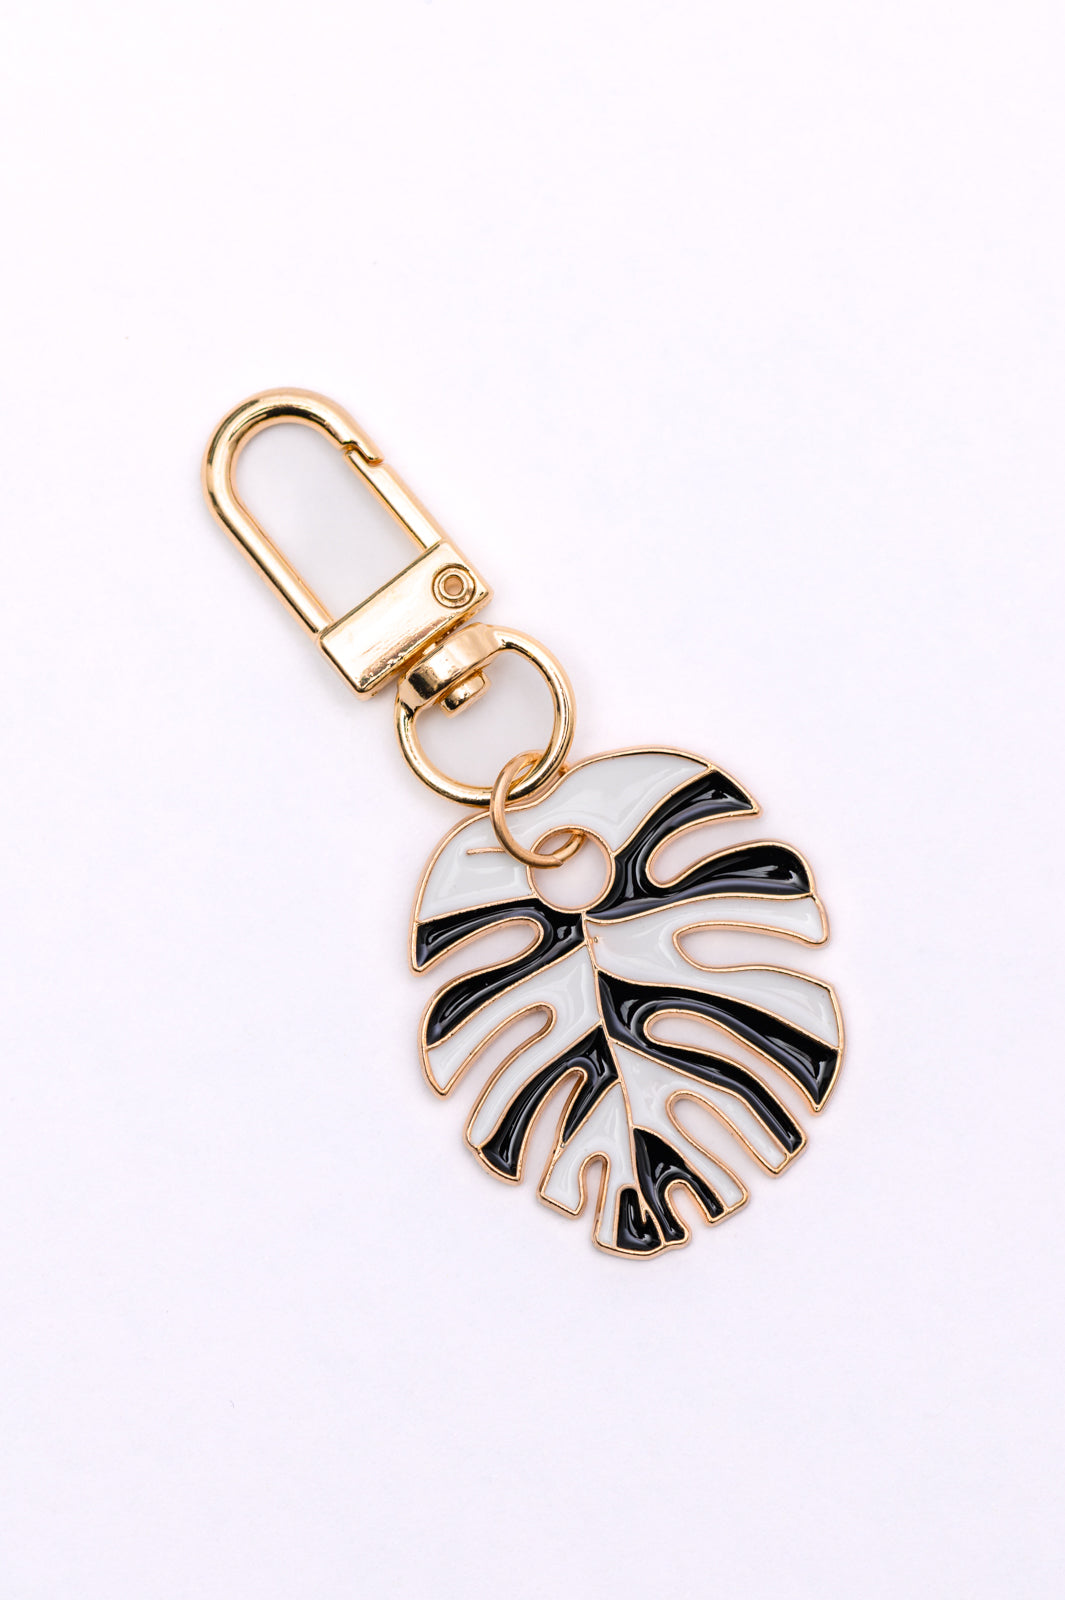 Plant Lover Monstera Keychain Womens Ave Shops   